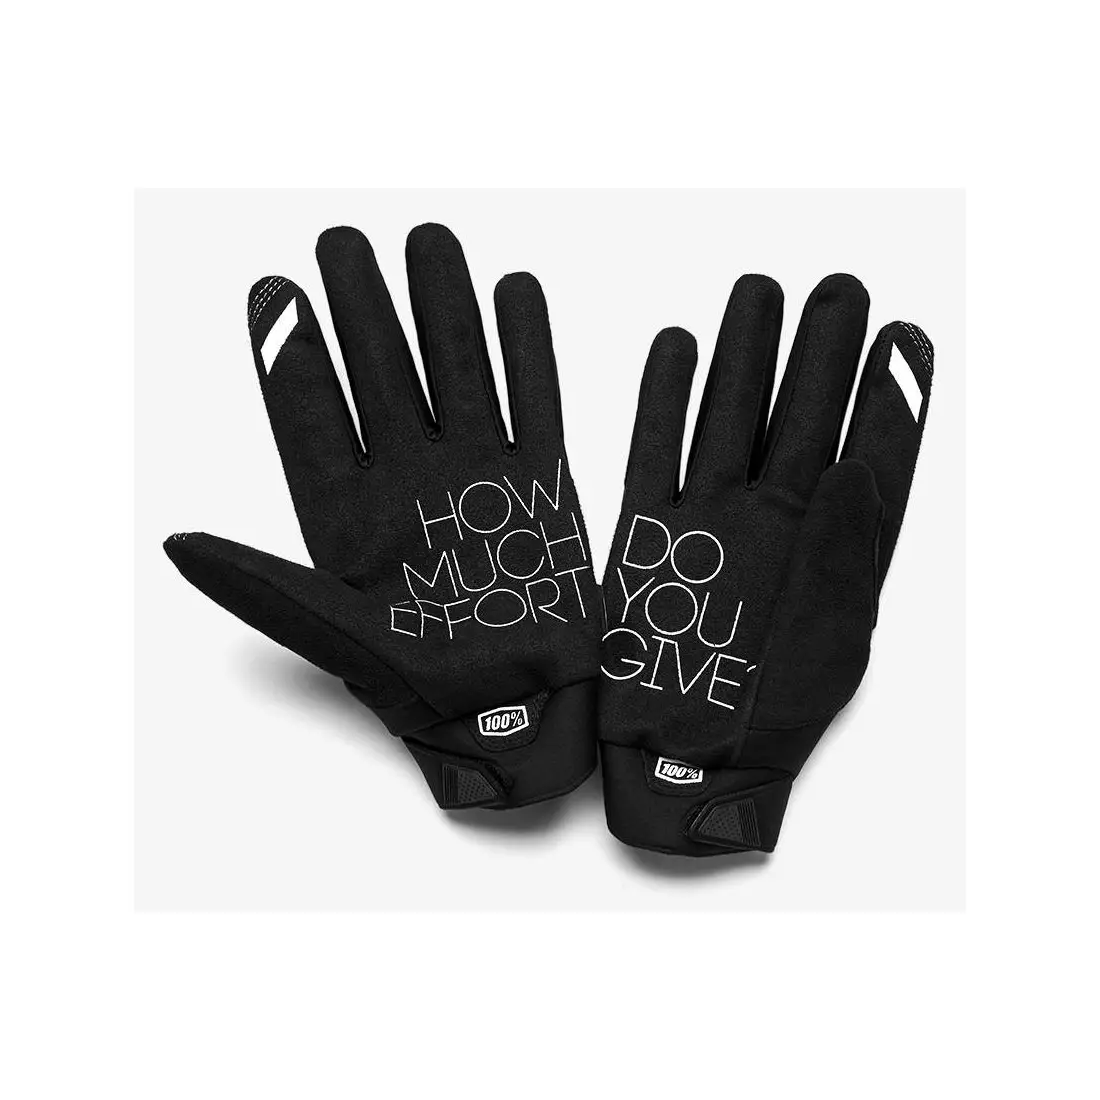 100% bicycle gloves brisker cold weather grey STO-10016-007-12